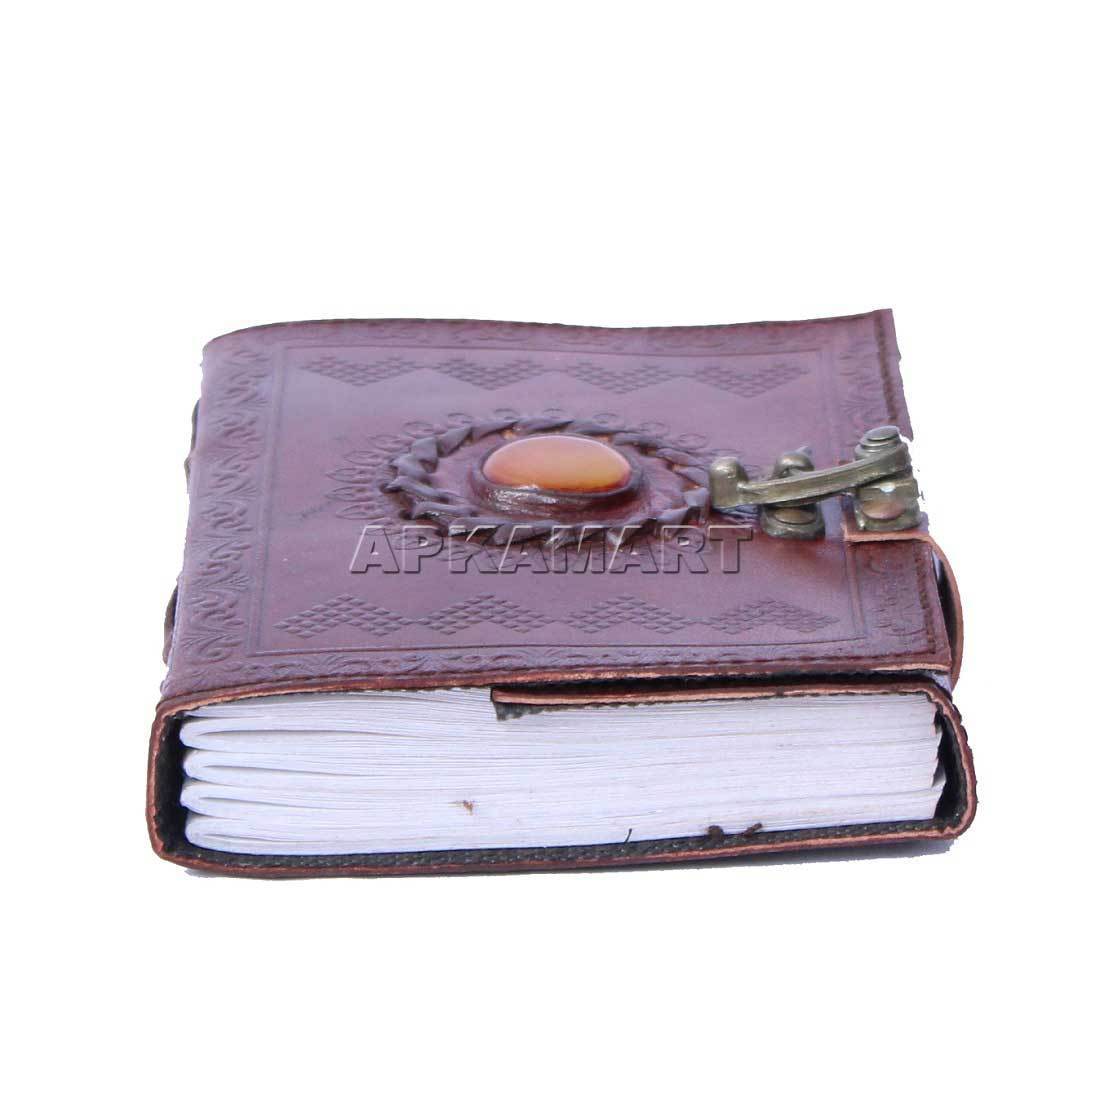 Lock Diary | Leather Diary - For Birthday & Anniversary Gifts - 6 inch - ApkaMart